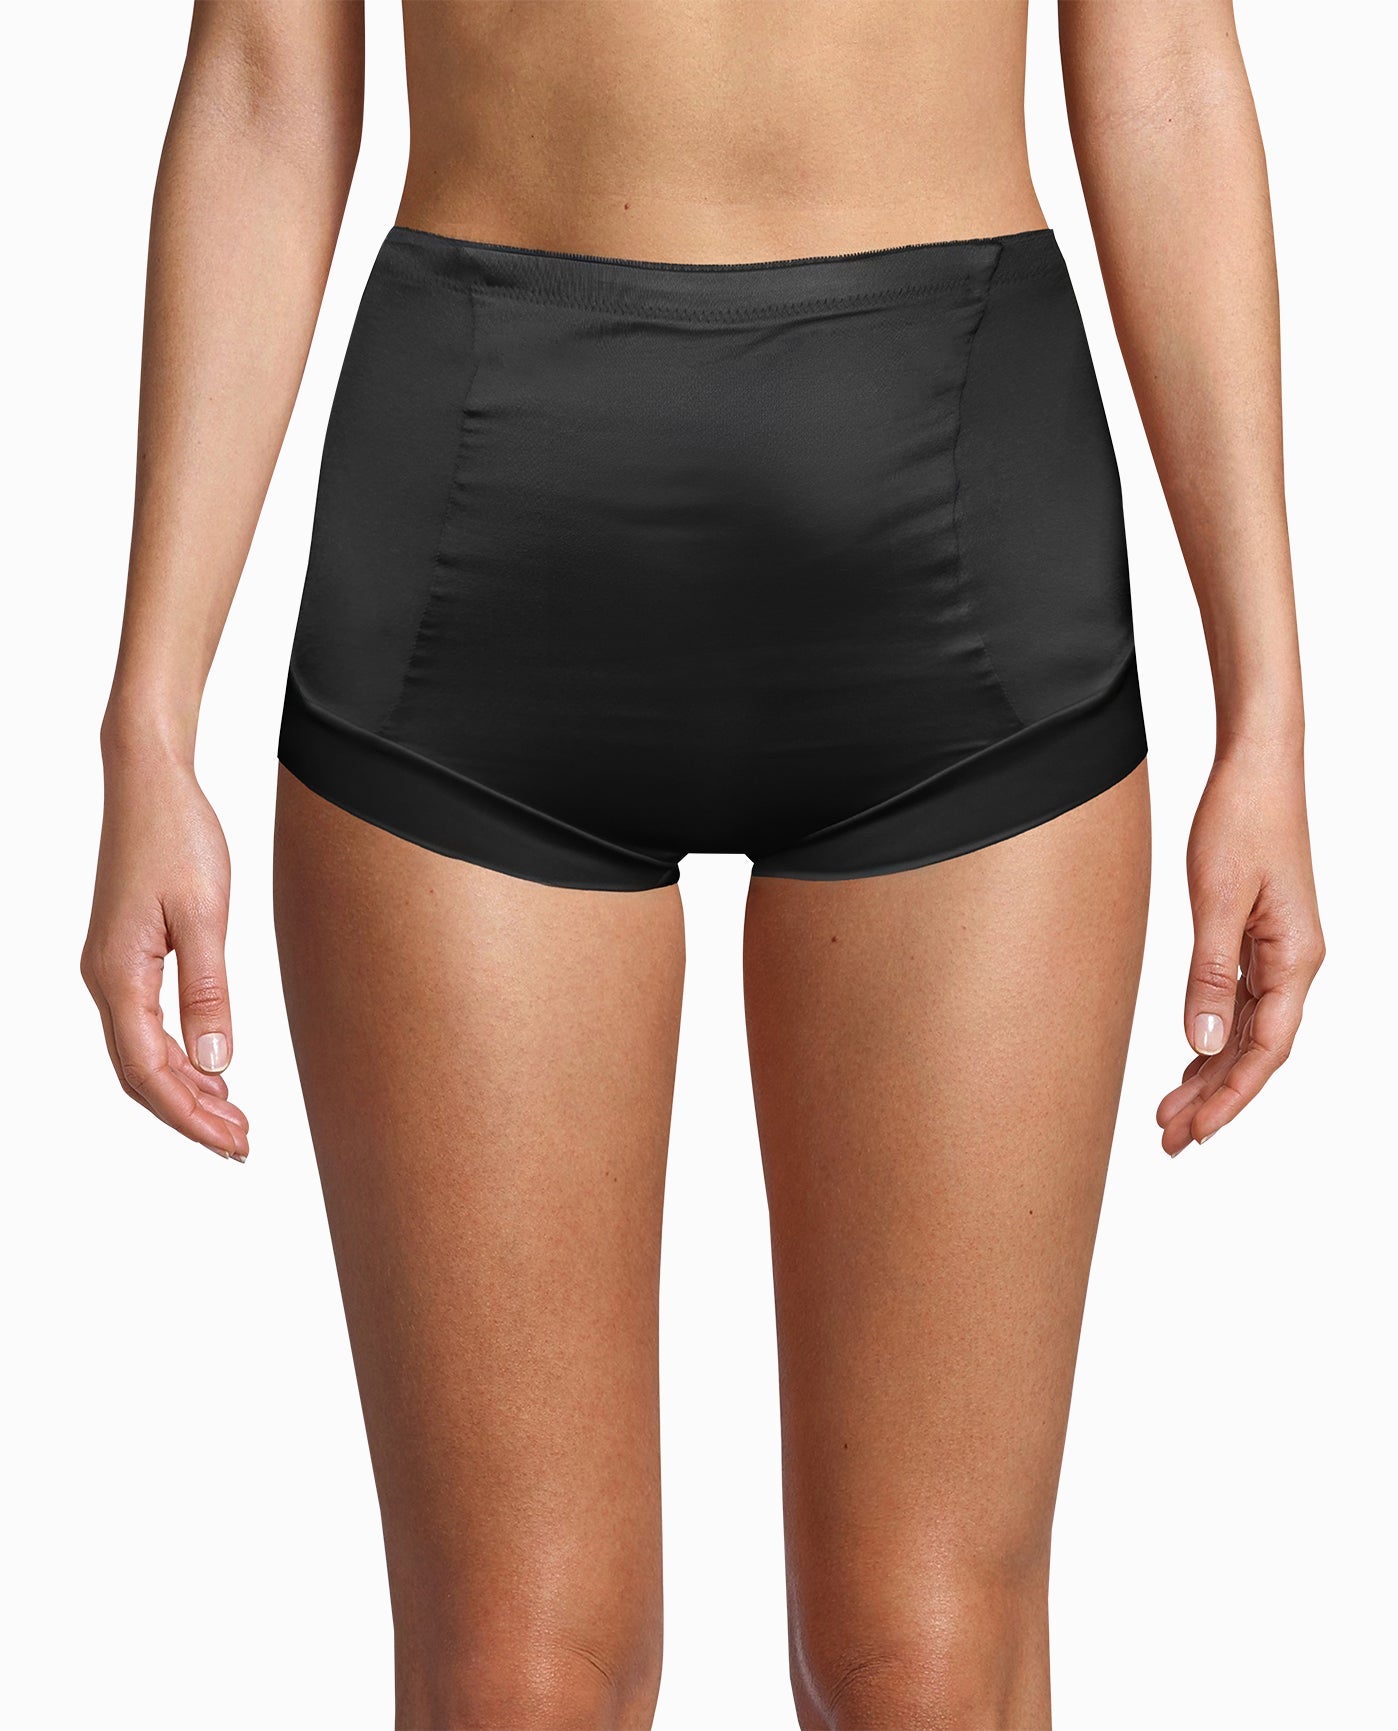 FRONT OF BLACK SHINY MICRO HIGH WAISTED SHAPING BRIEFS | Dune Dust and Black